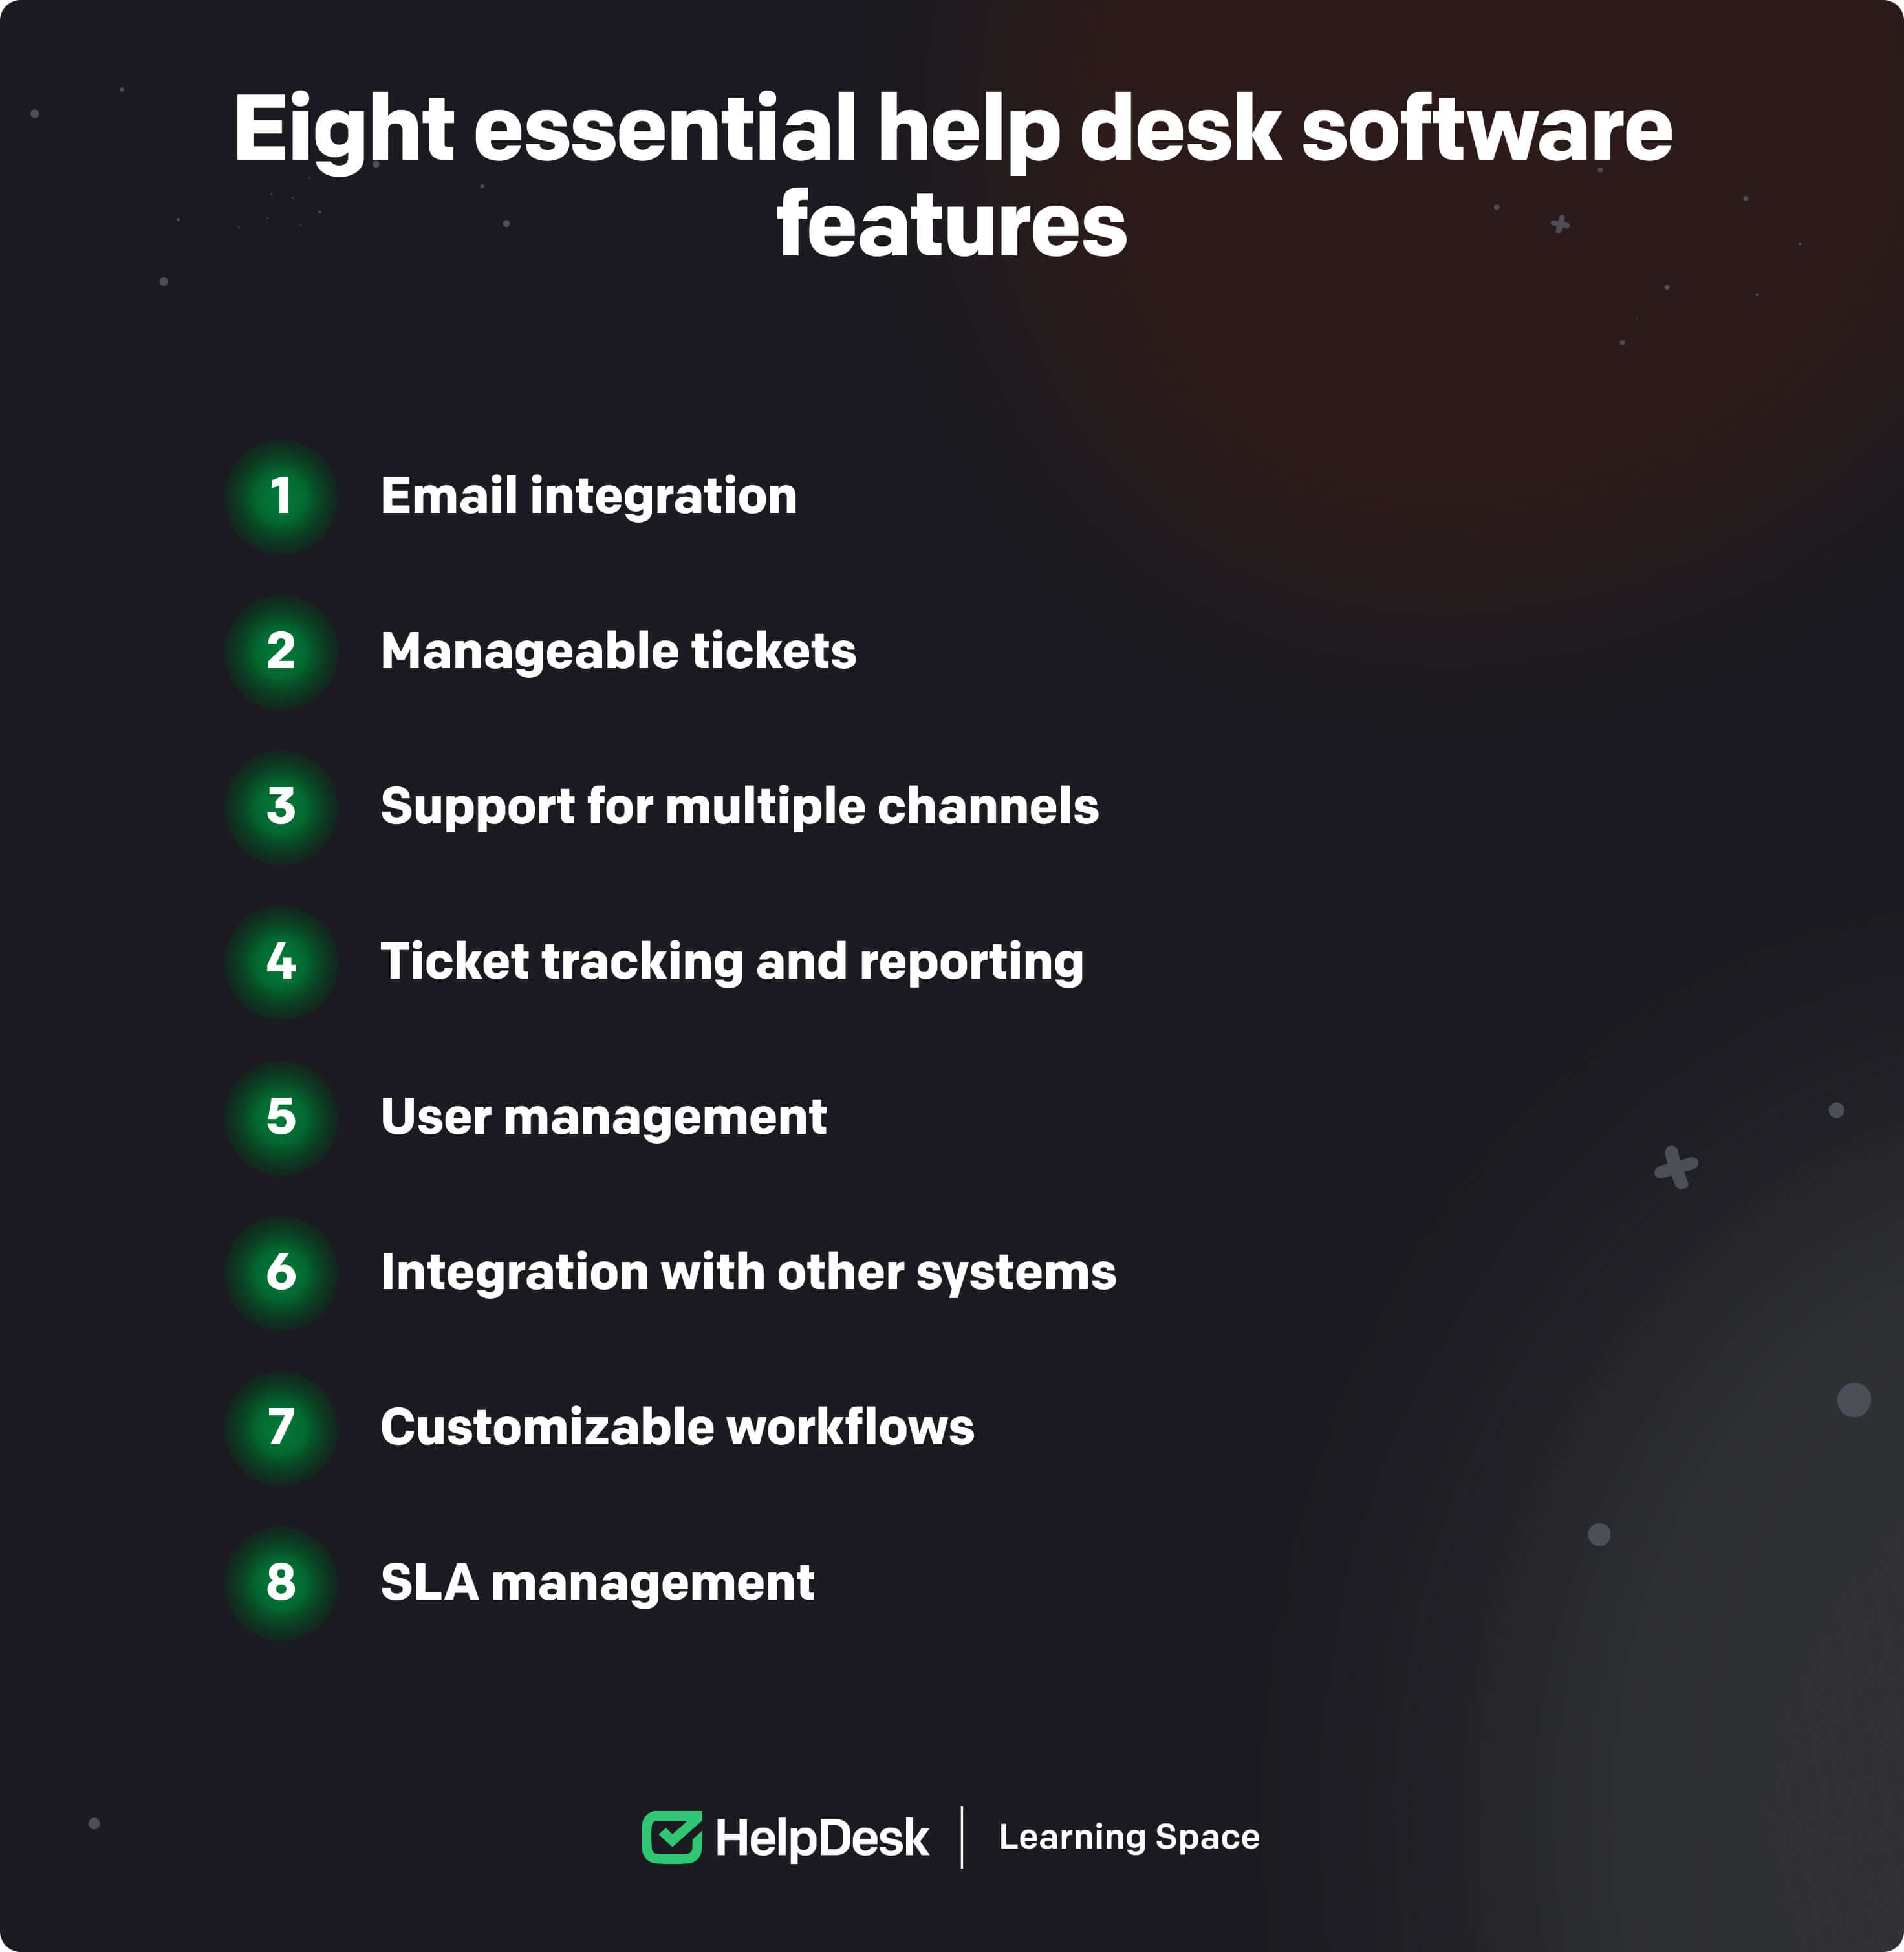 Eight main help desk software features: 1. Email integration, 2. Manageable tickets, 3. Support for multiple channels, 4. Ticket tracking and reporting, 5. User management, 6. Integration with other systems, 7. Customizable workflows, 8. SLA management.